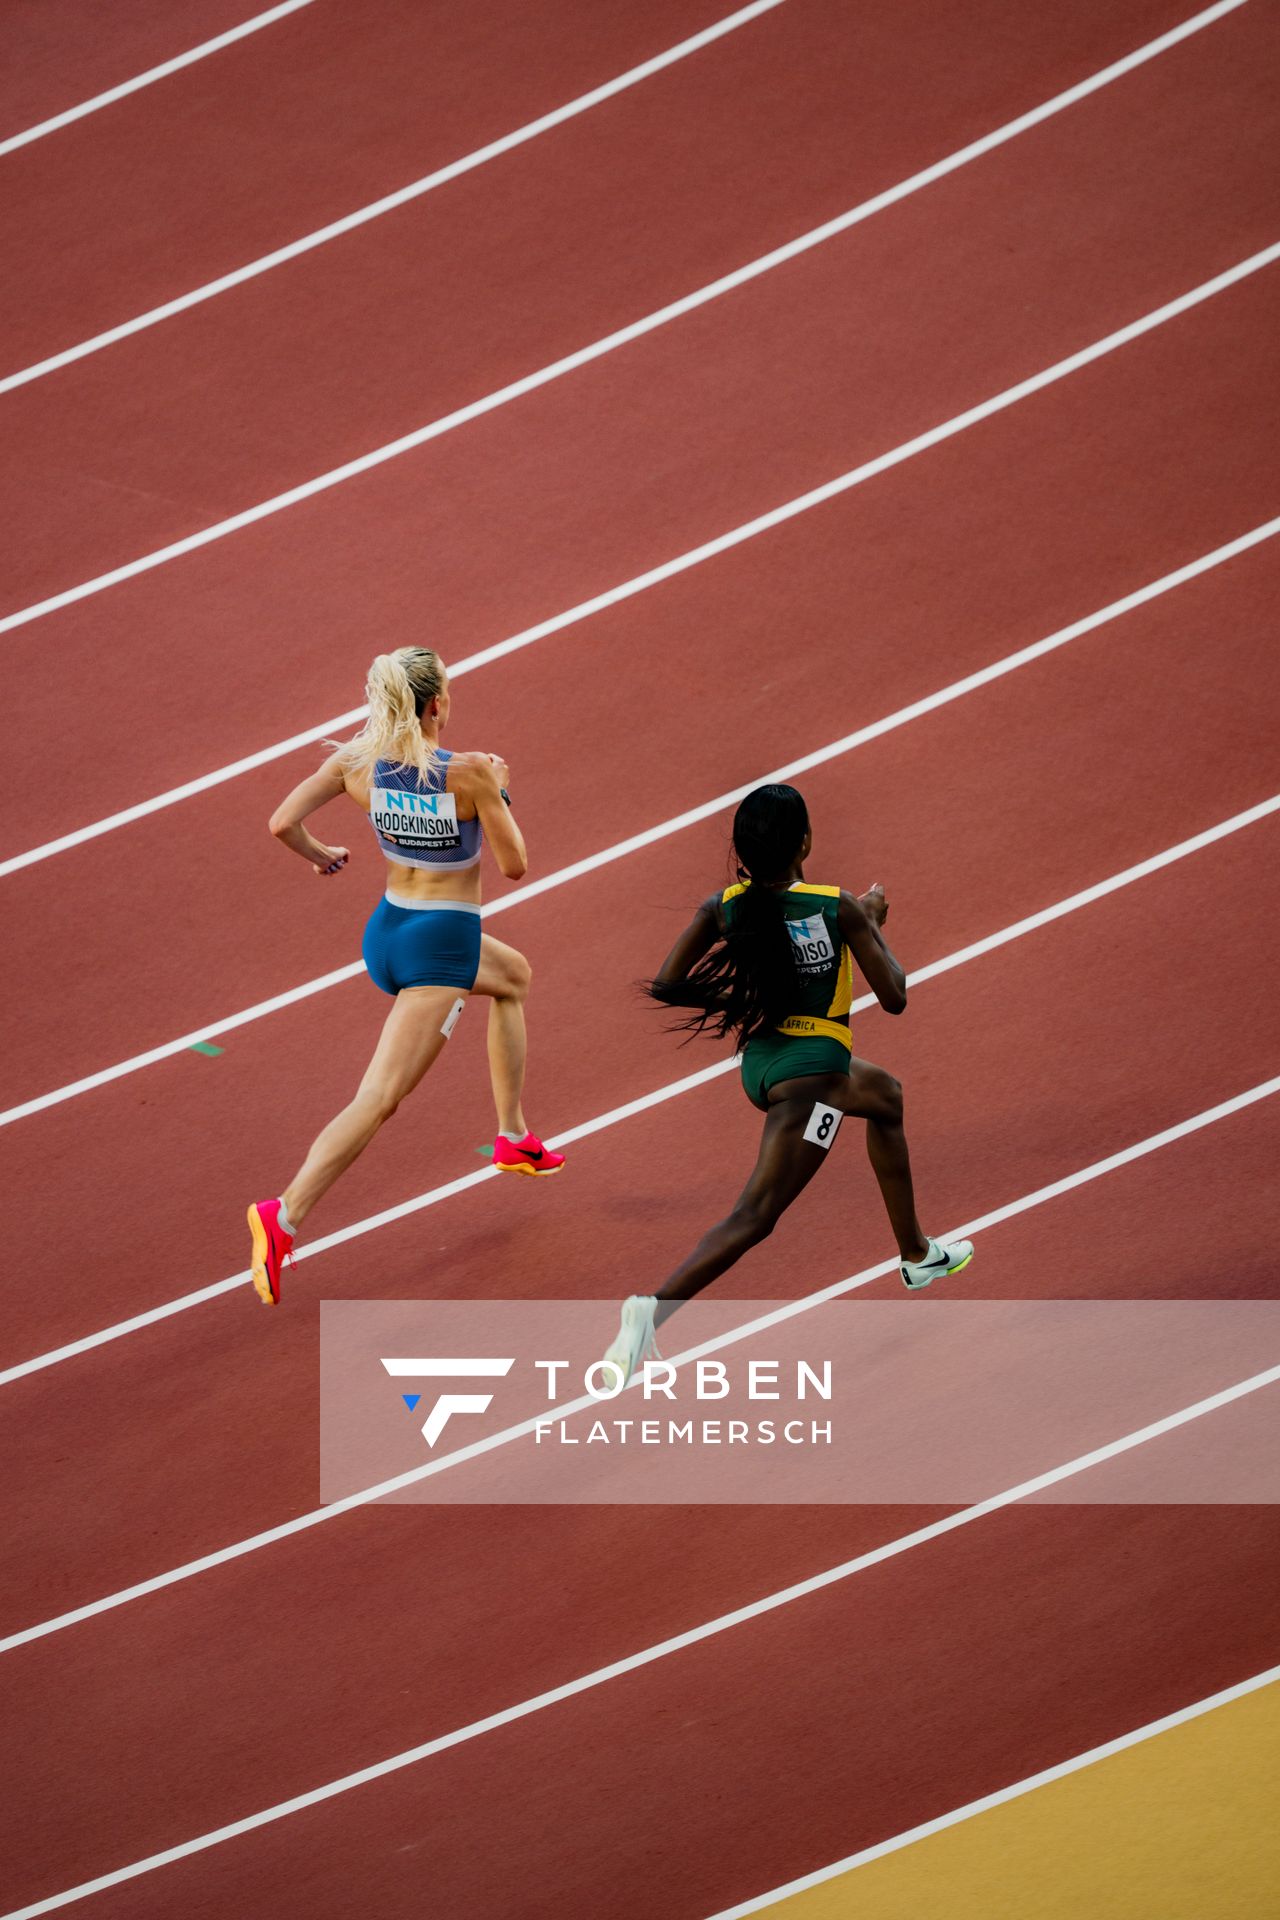 Keely Hodgkinson (GBR/Great Britain), Prudence Sekgodiso (RSA/South Africa) during the 800 Metres on Day 5 of the World Athletics Championships Budapest 23 at the National Athletics Centre in Budapest, Hungary on August 23, 2023.